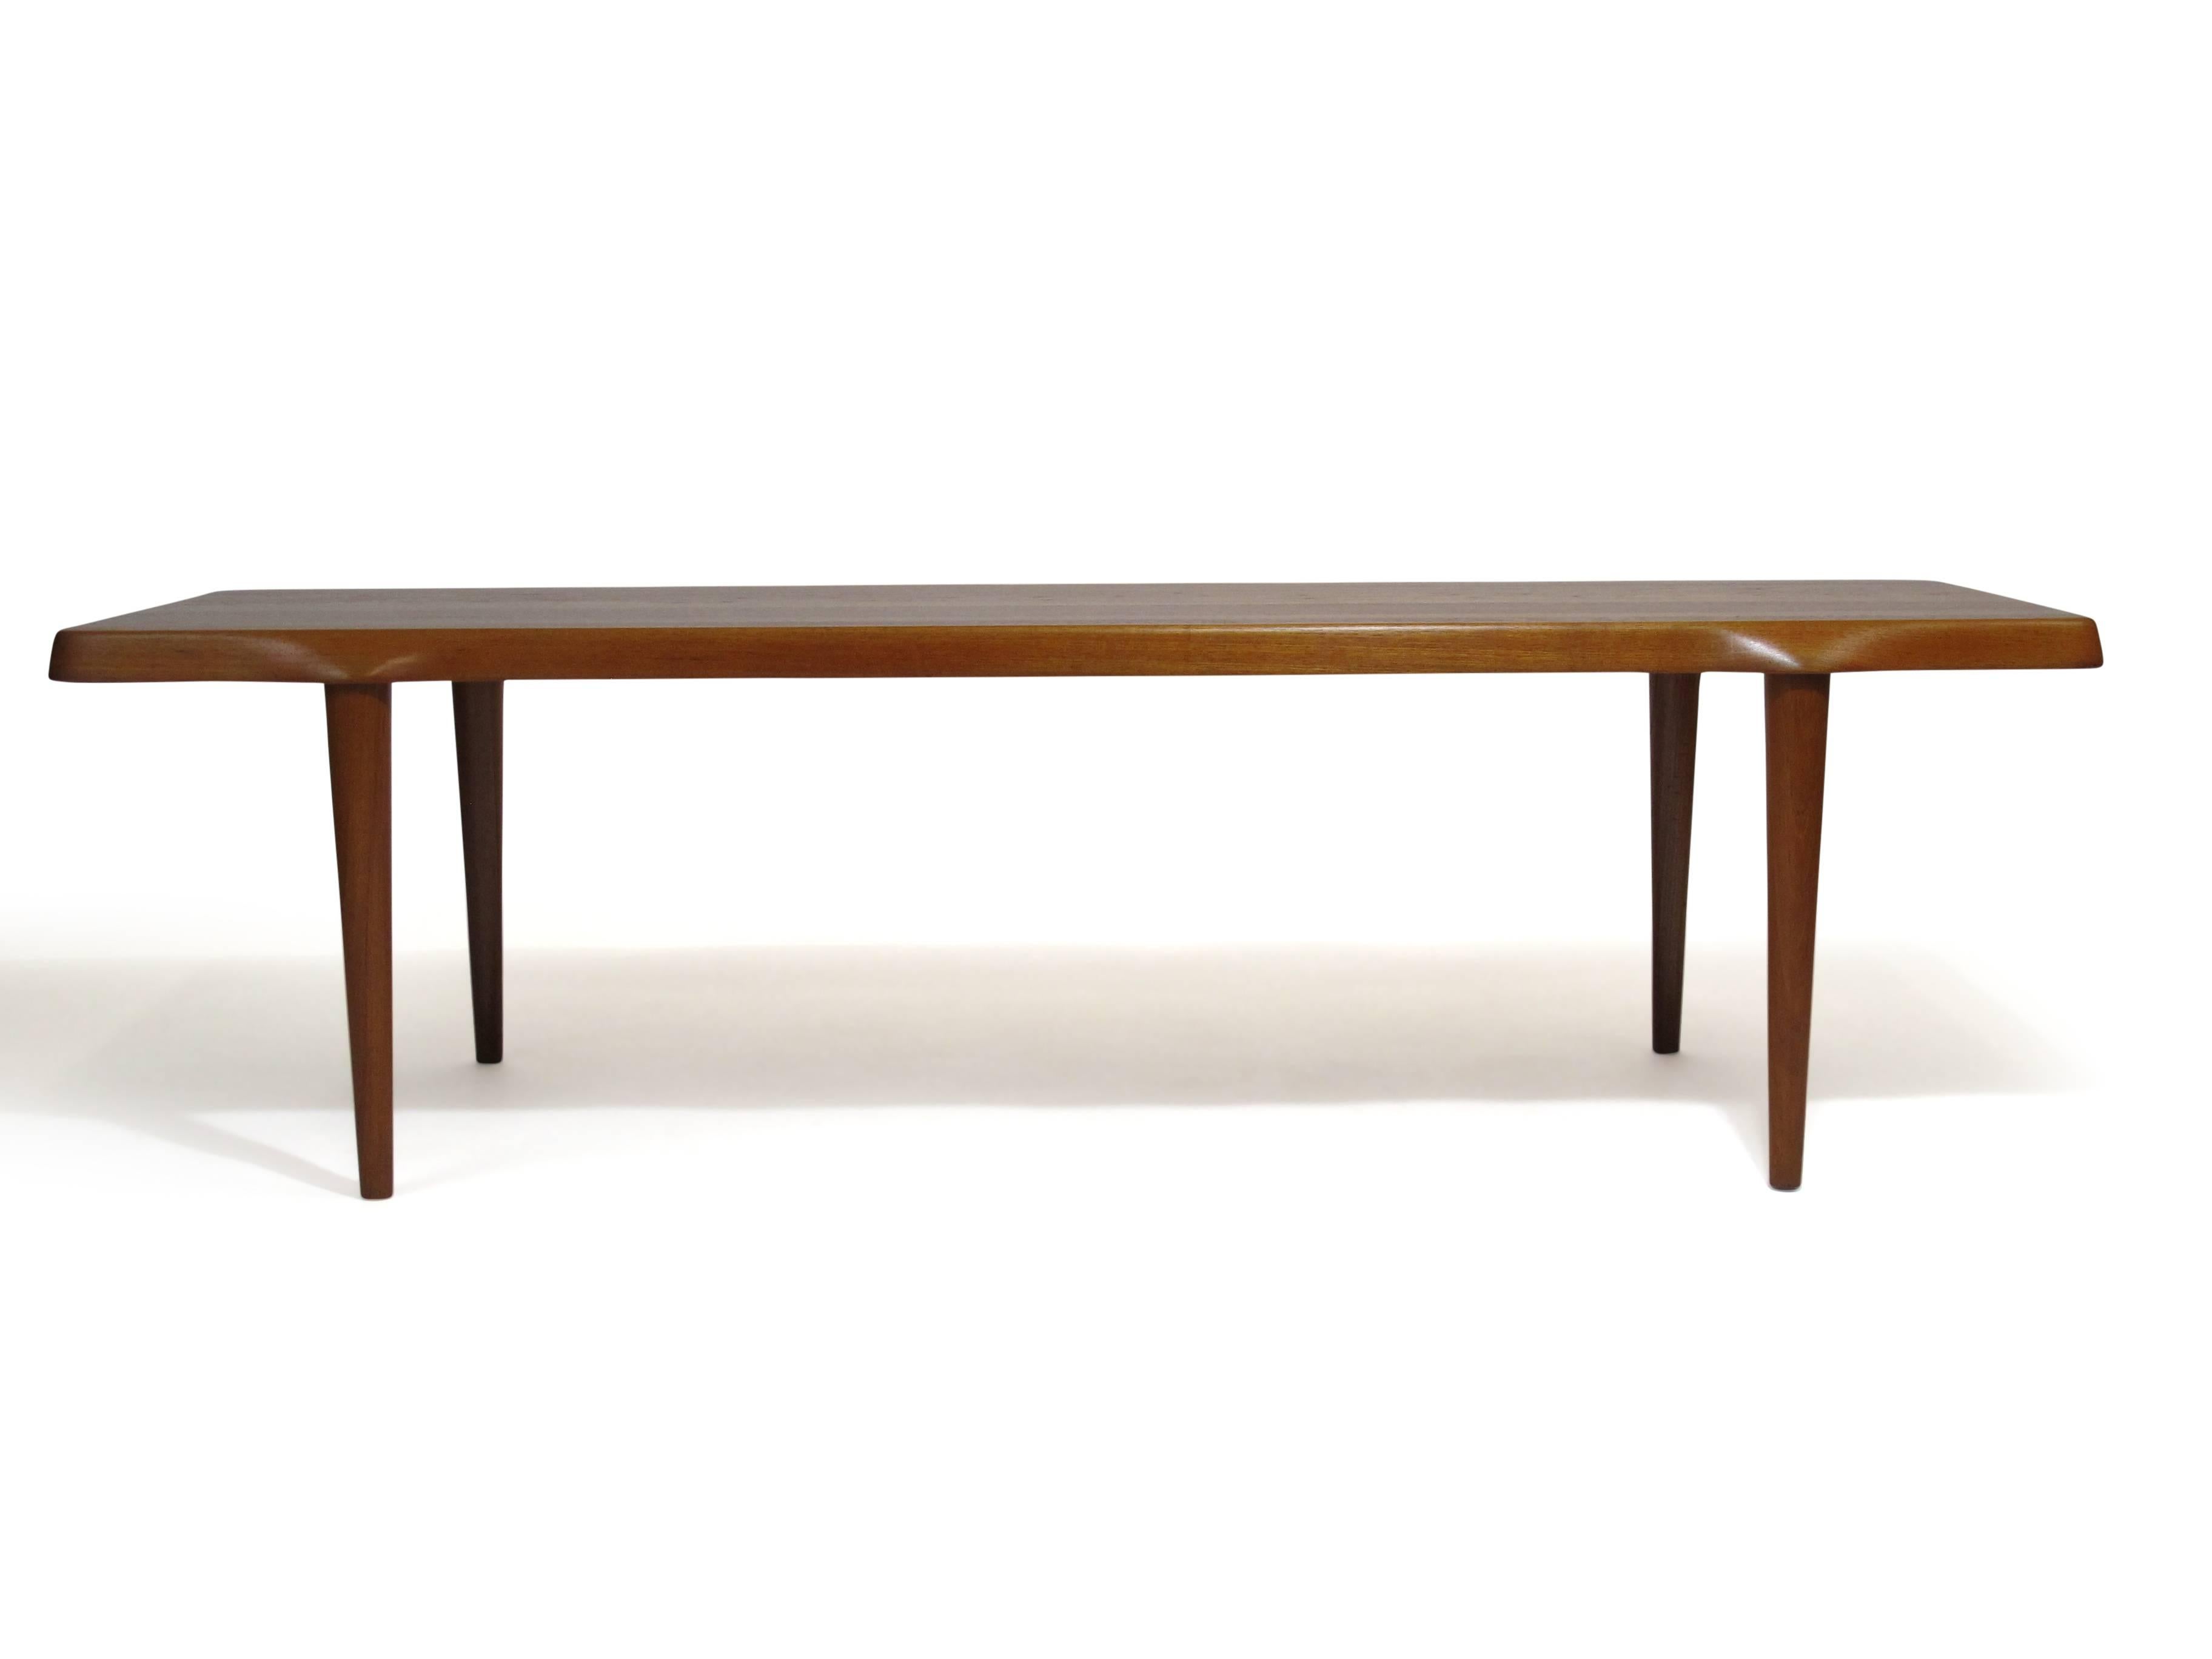 20th Century Danish Coffee Table Crafted of Solid Teak